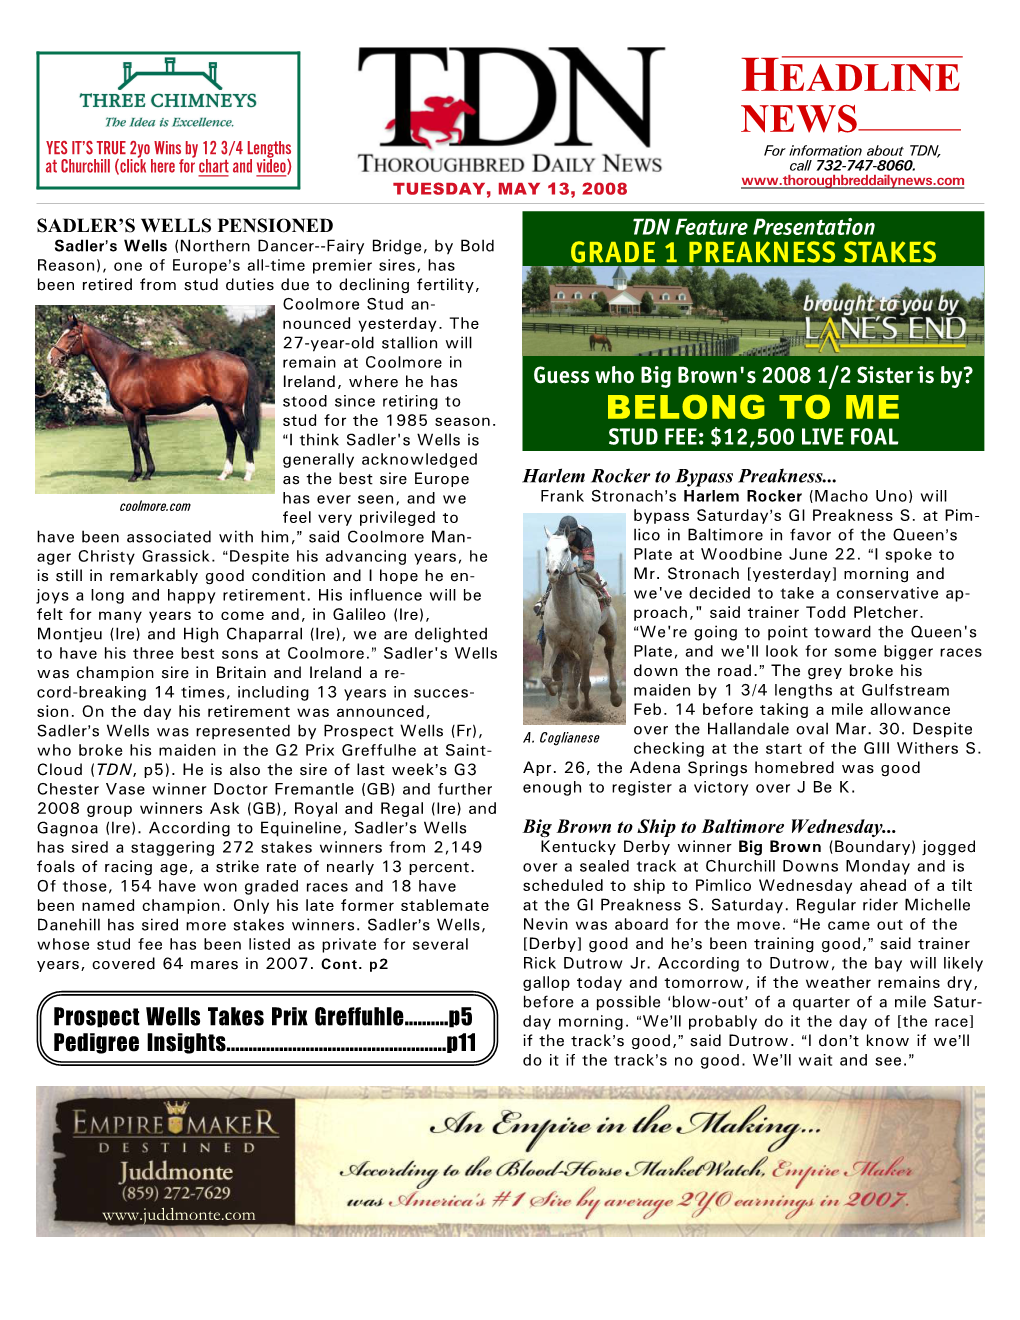 HEADLINE NEWS YES IT’S TRUE 2Yo Wins by 12 3/4 Lengths for Information About TDN, at Churchill (Click Here for Chart and Video) Call 732-747-8060